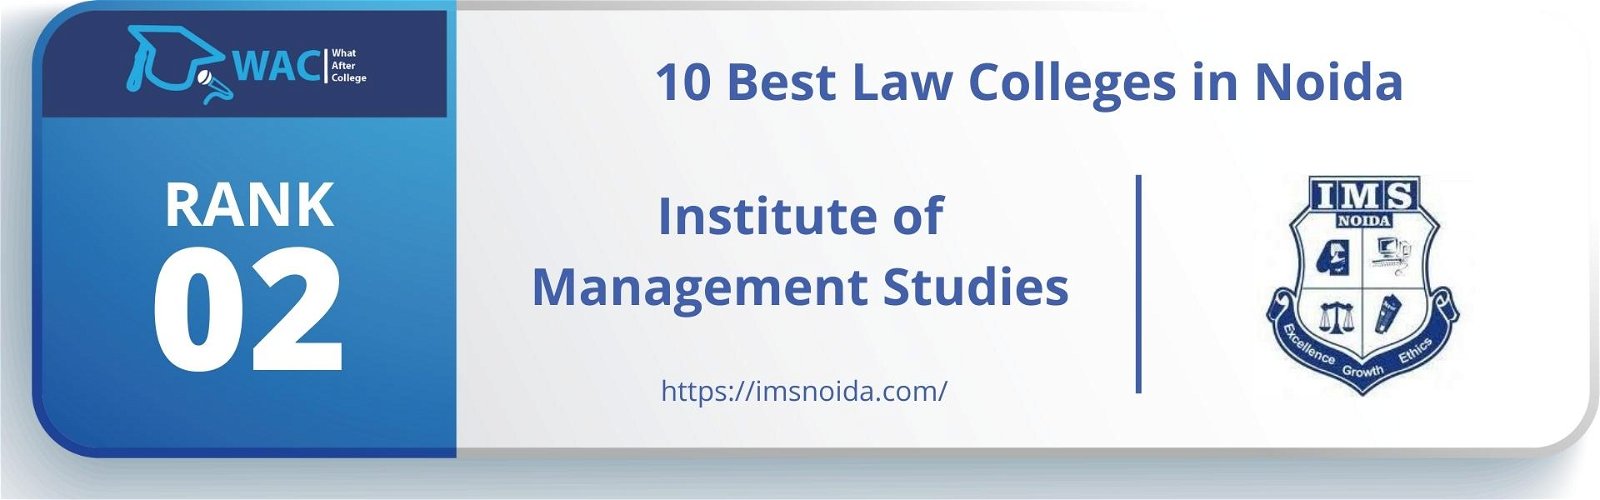 Law Colleges in Noida